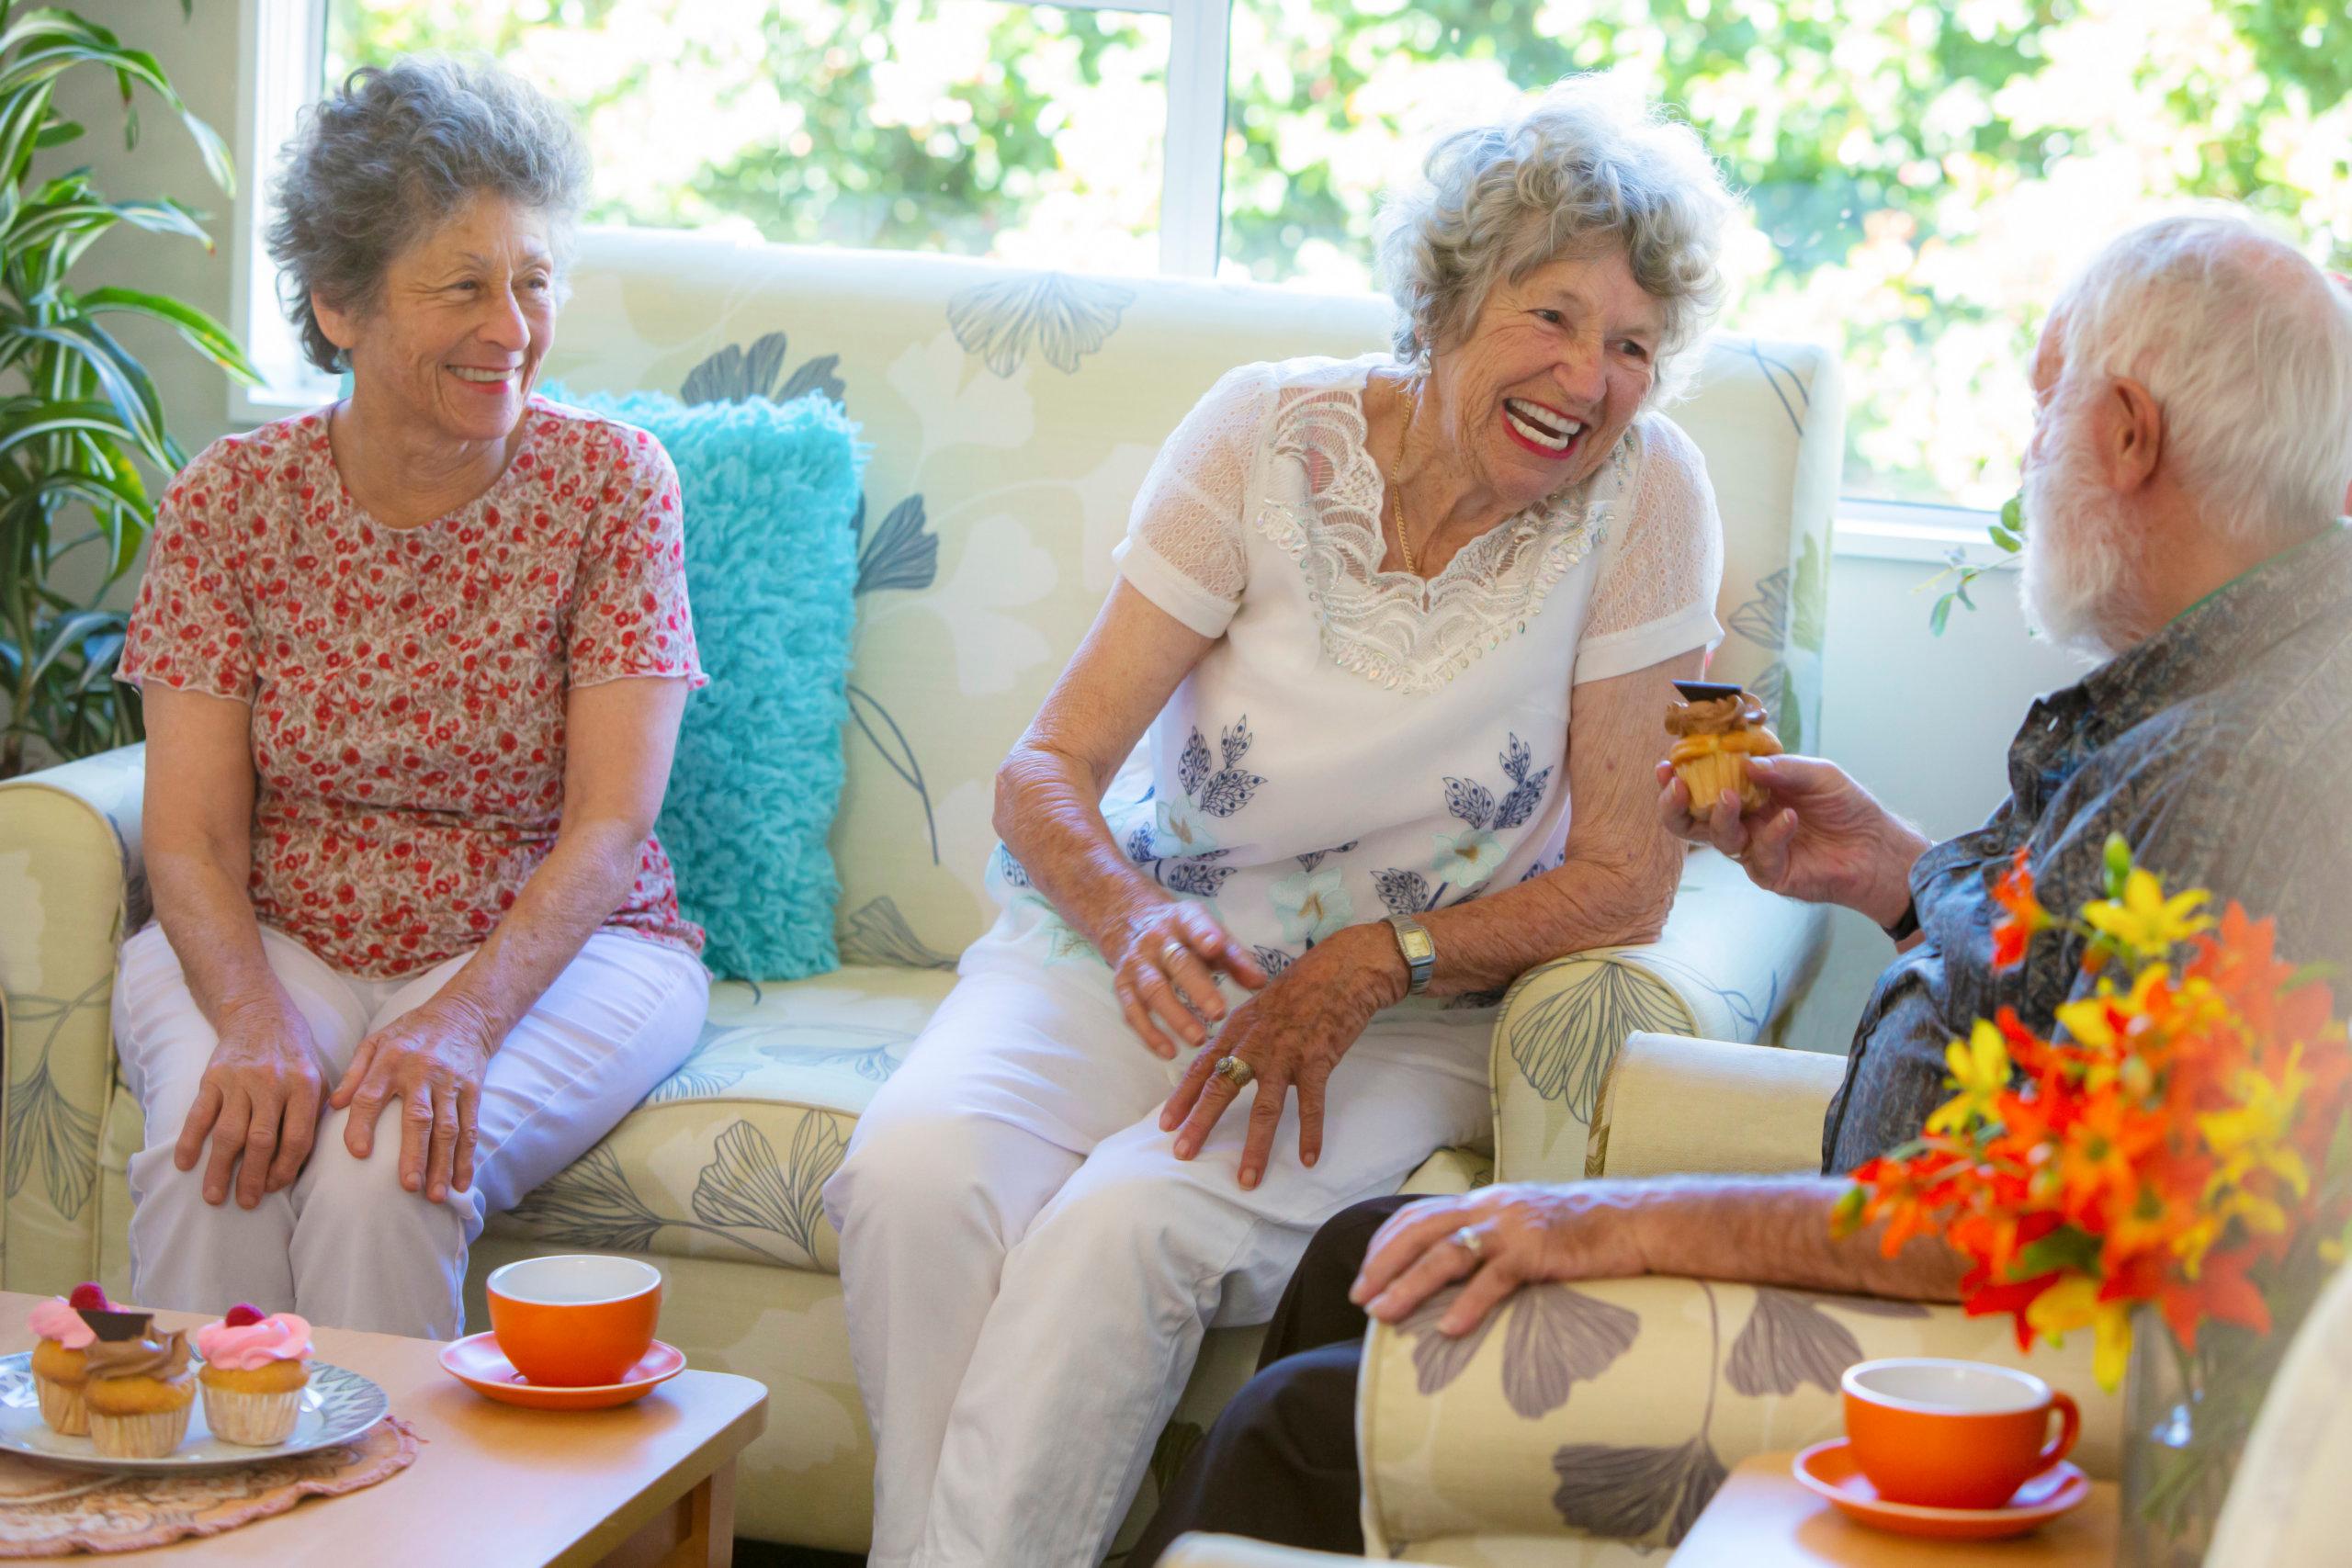 Three rest home residents laughing with cake